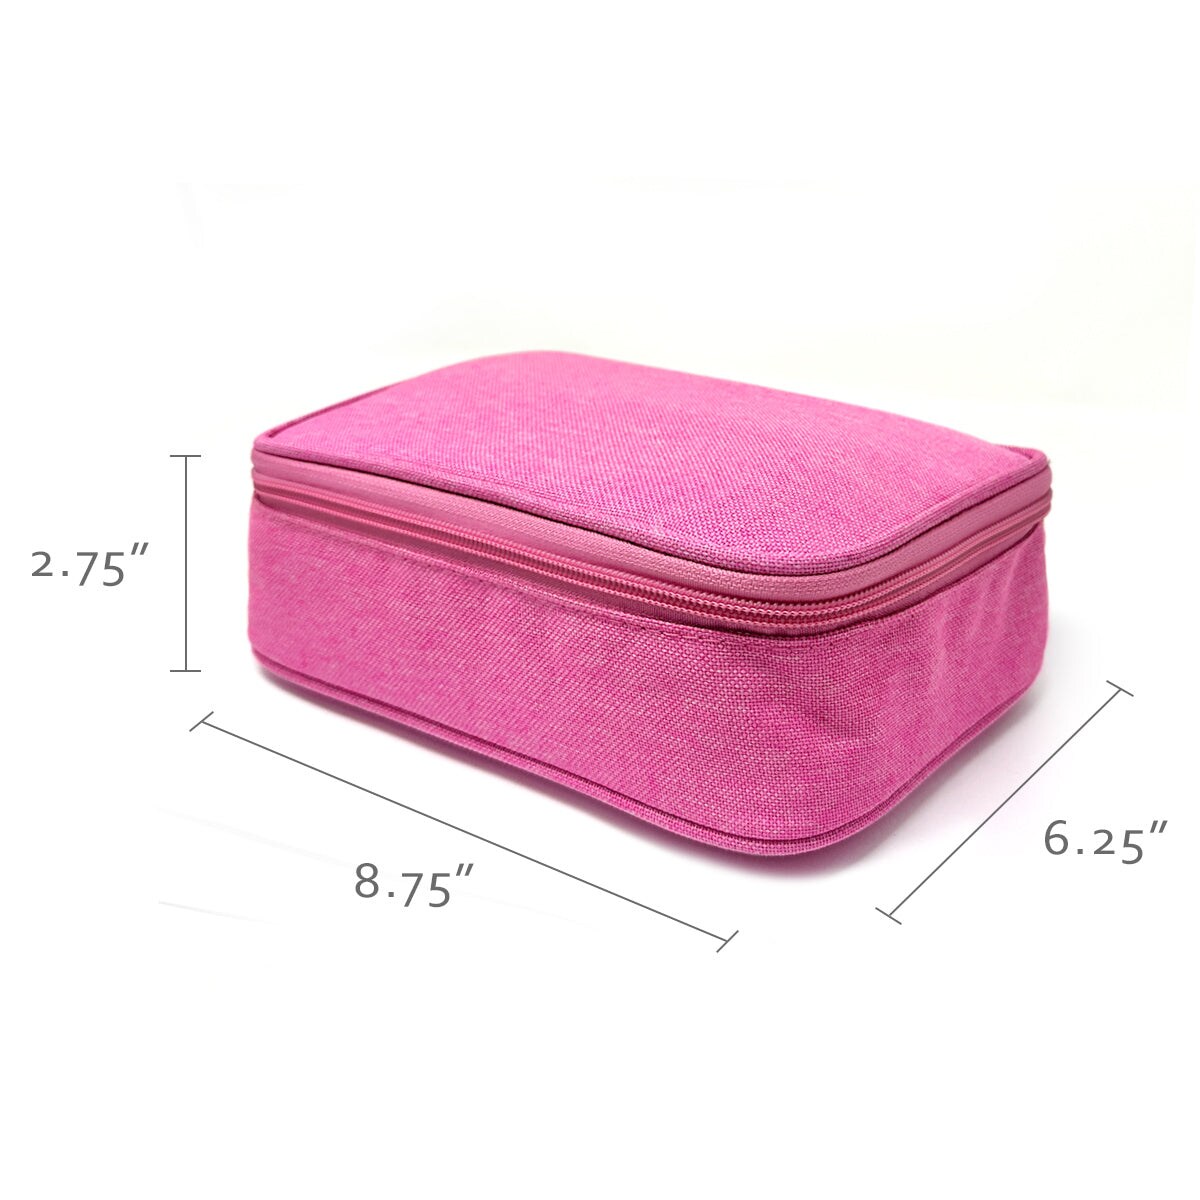 Wrapables Large Capacity 72 Slot Pencil Case for Colored Pencils, Stationery Pouch, Pink